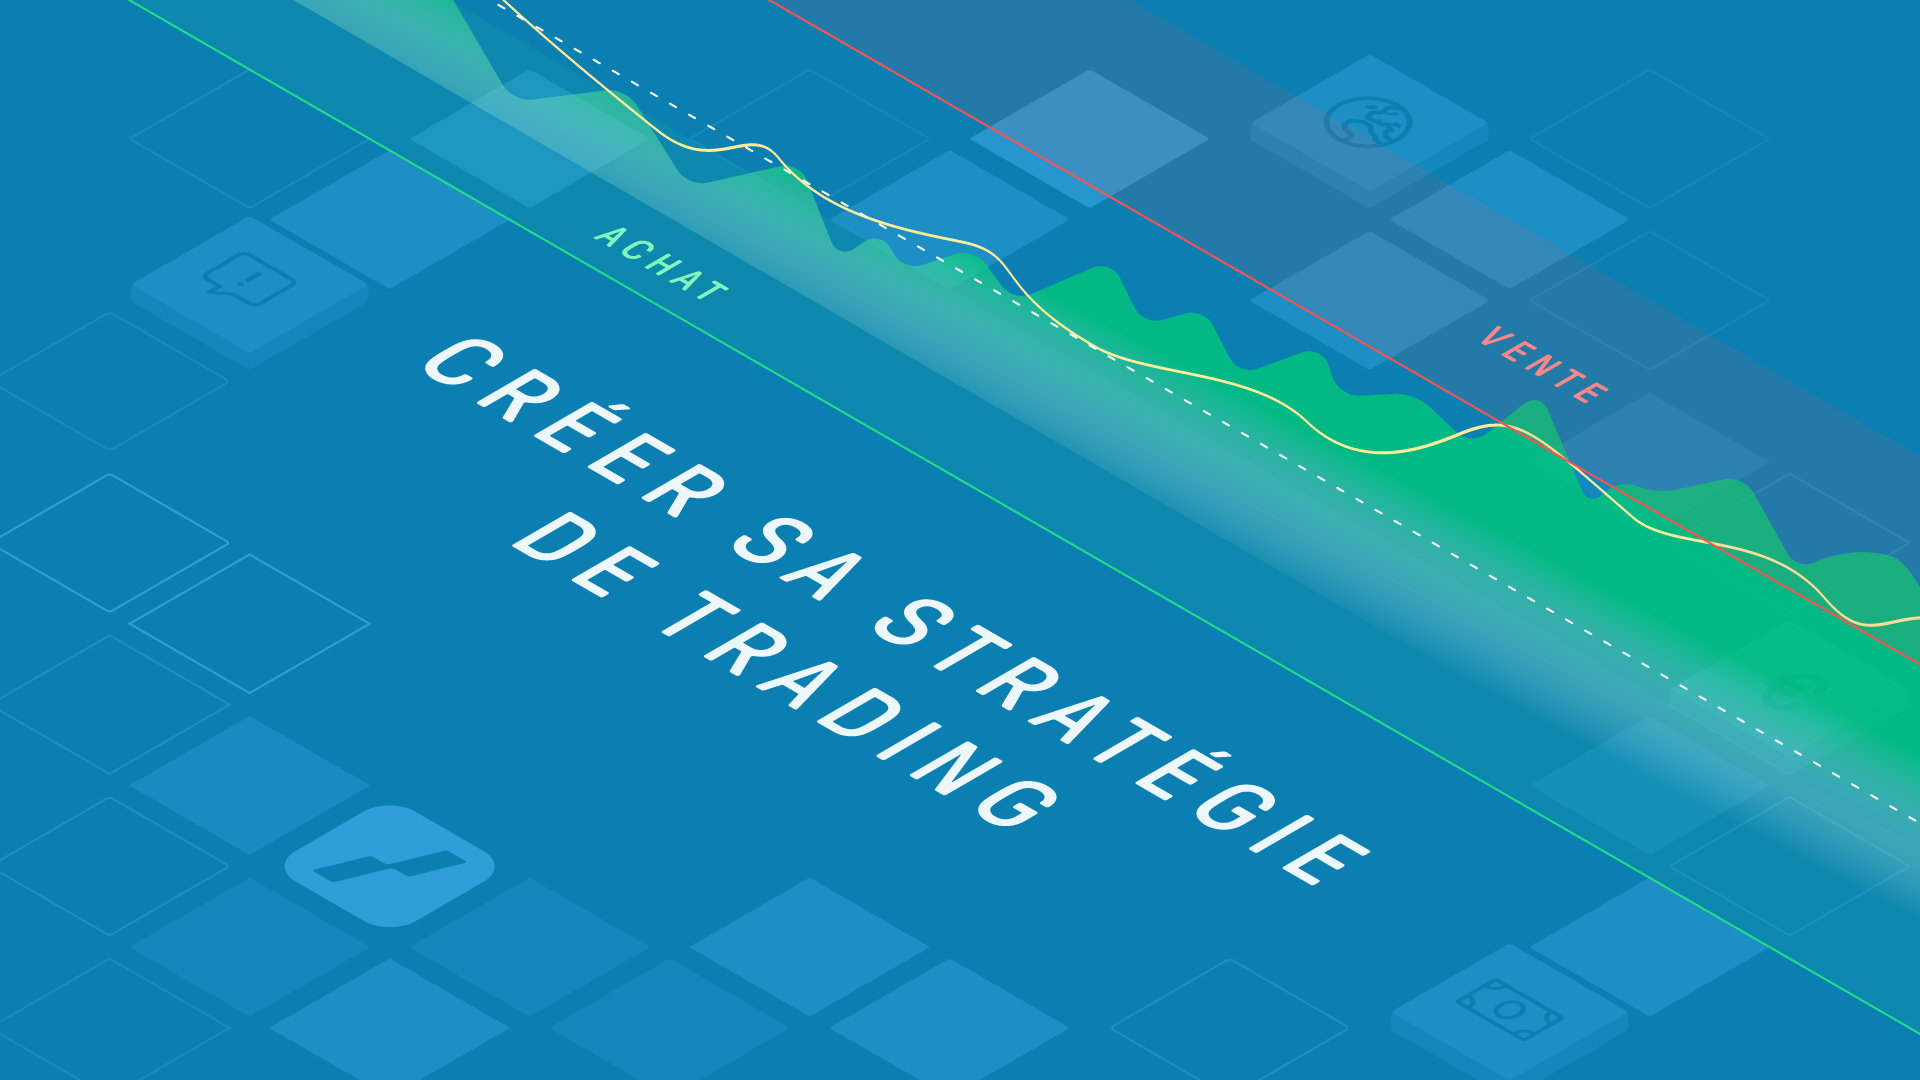 stratégie trading – trading strategies - featured image